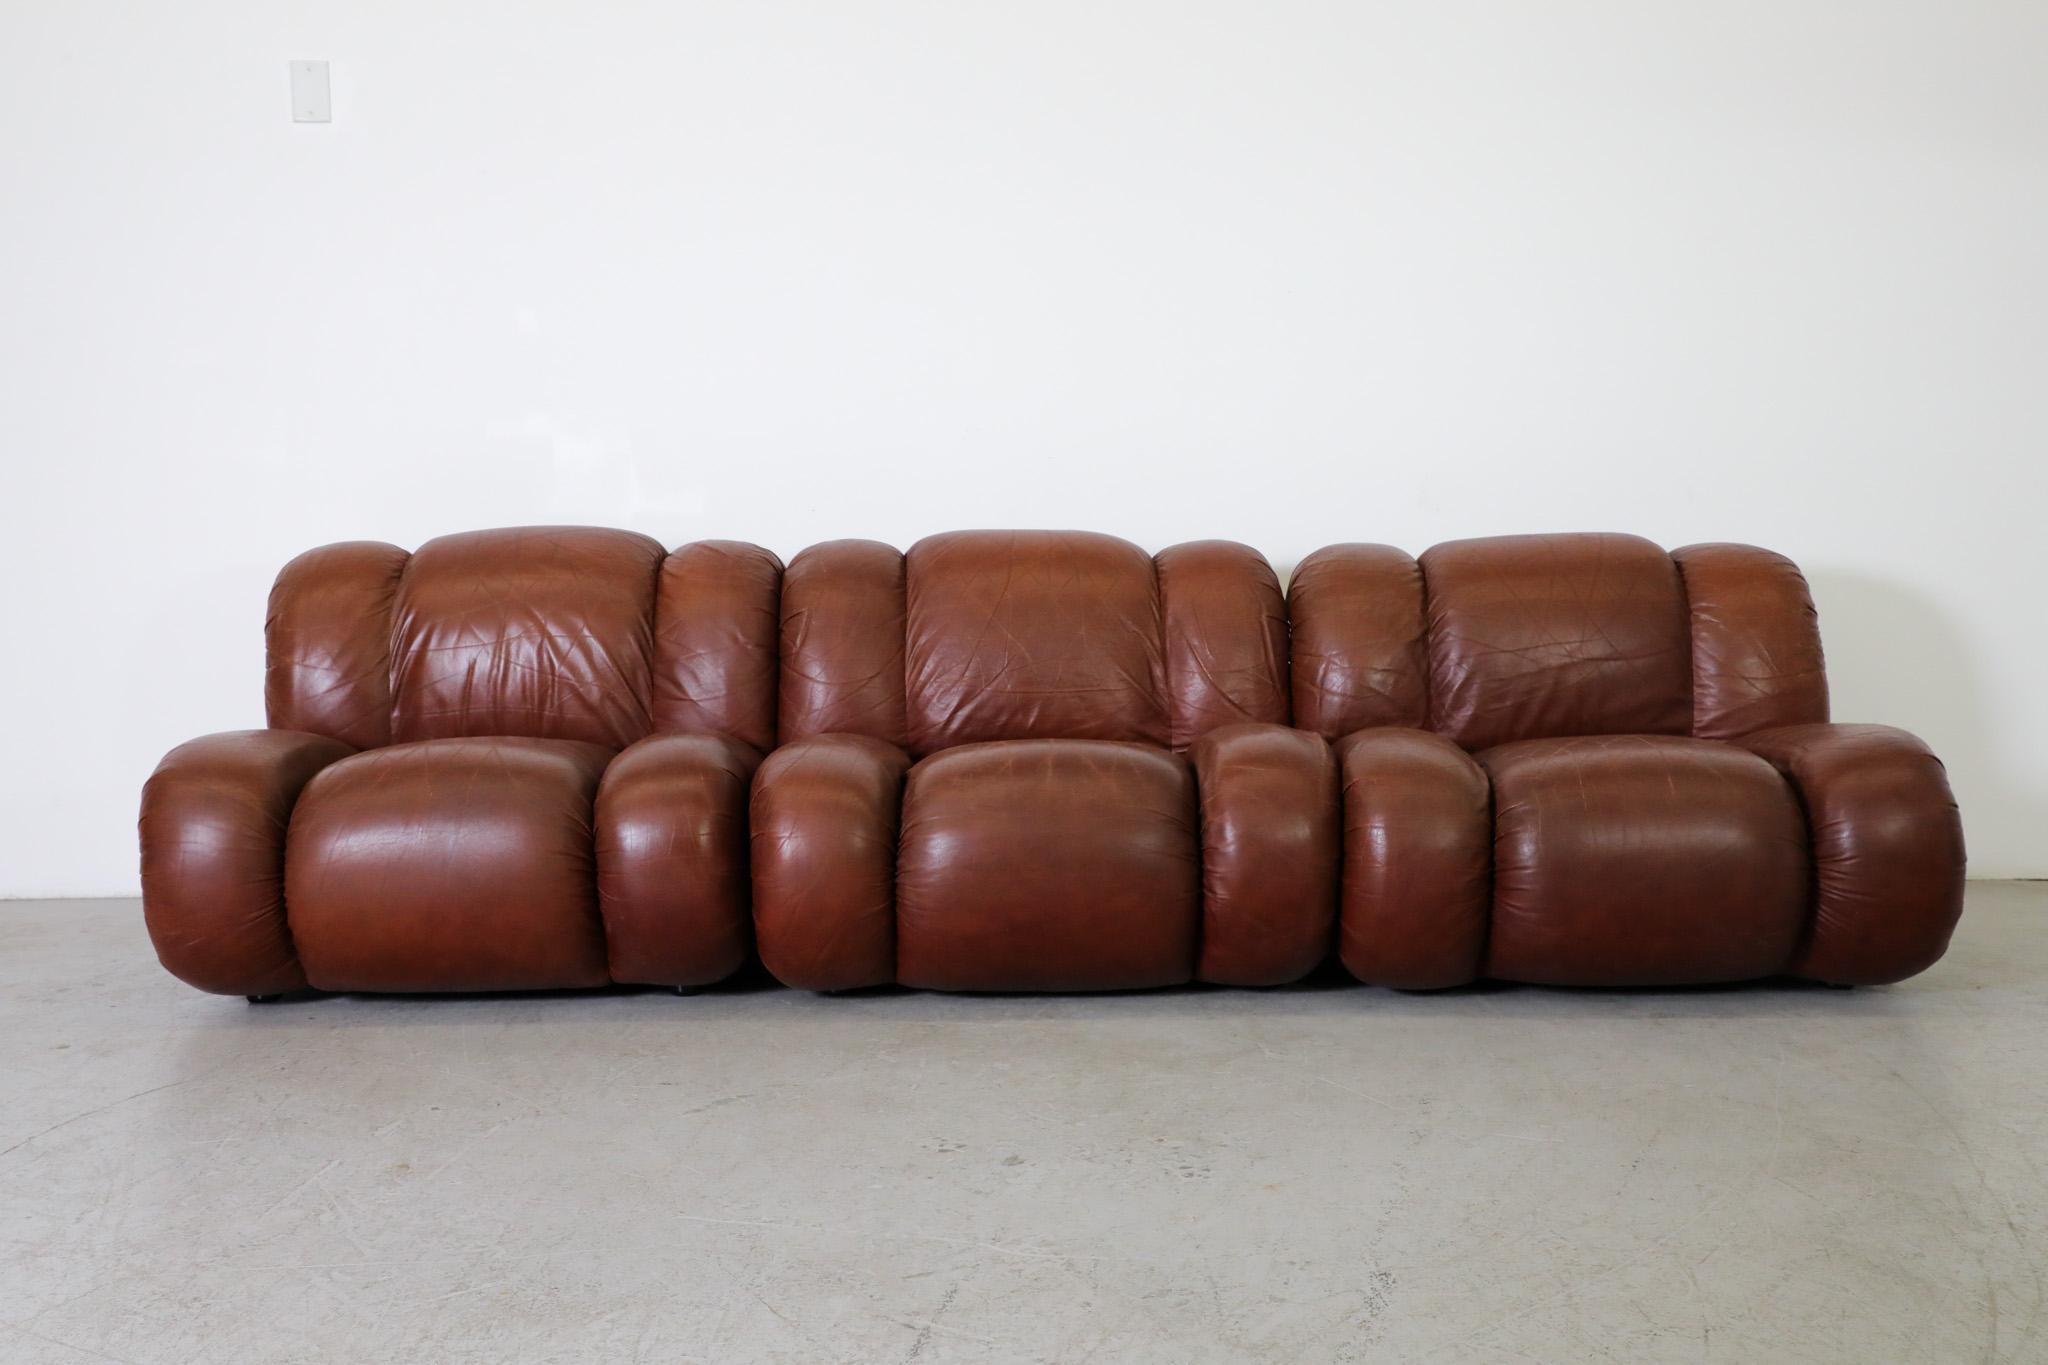 Mid-Century Modern Mimo Padova Velasquez Modular Sofa In Brown Leather And Chrome, Italy 1970s For Sale